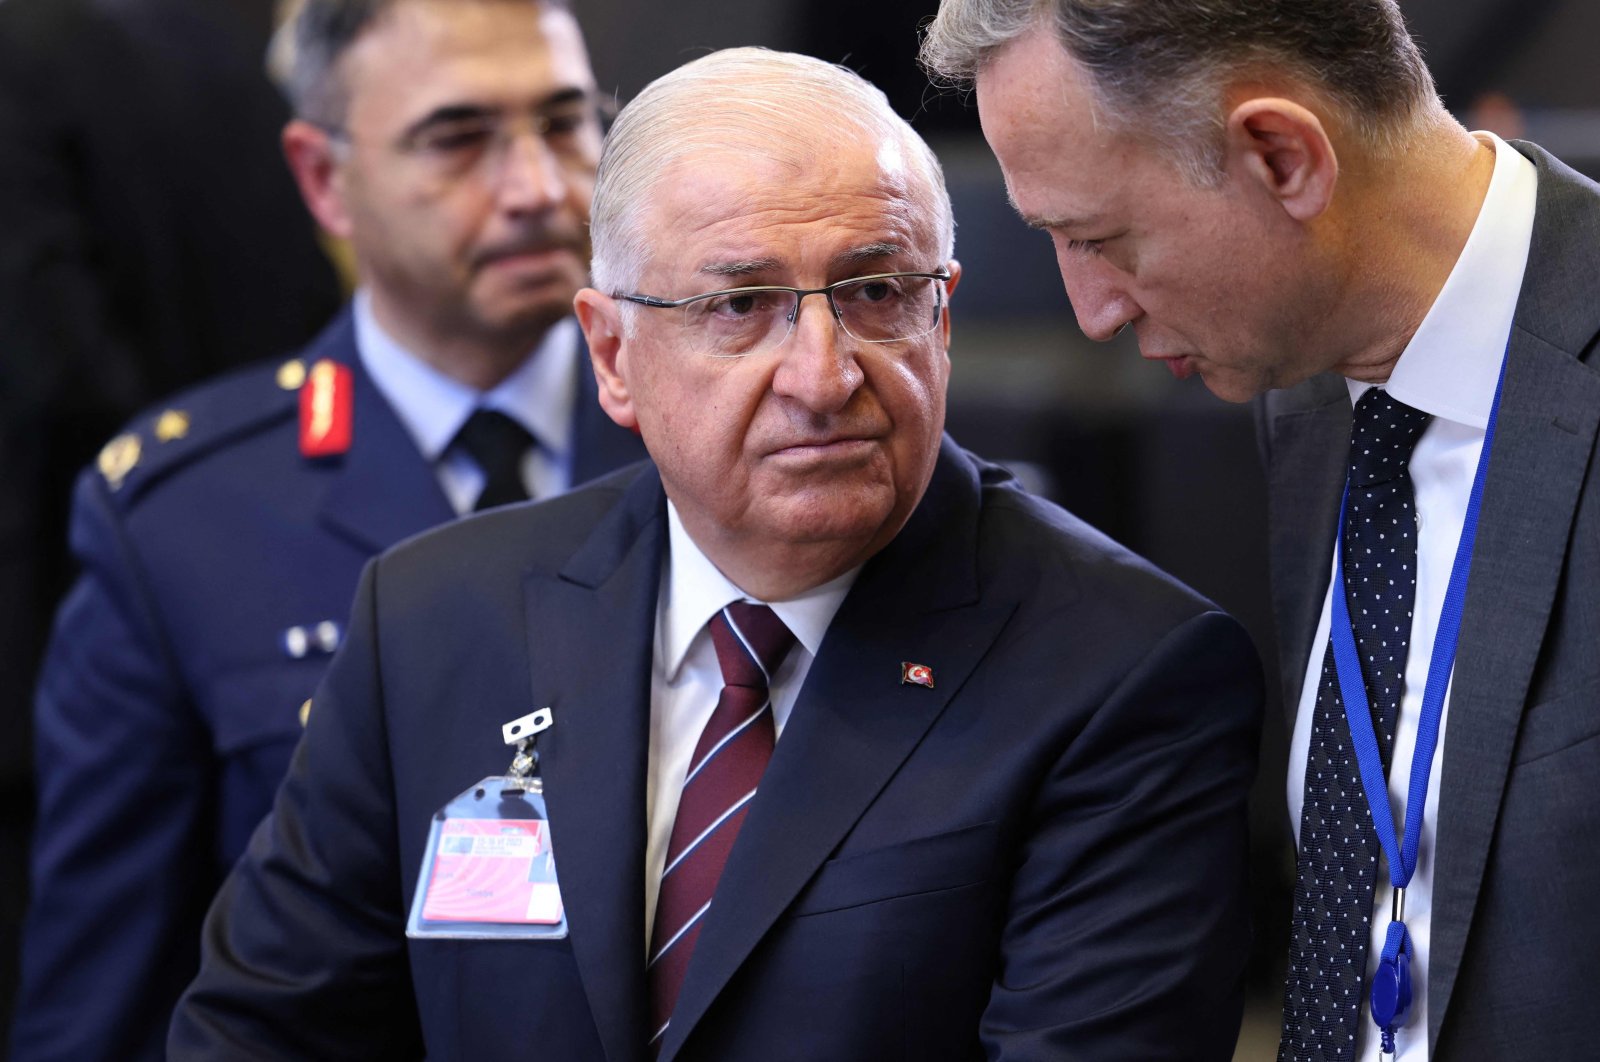 Minister of National Defense Yaşar Güler (L) looks on prior to a meeting of the NATO-Ukraine Commission at the NATO headquarters in Brussels, Belgium, June 15, 2023. (AFP Photo)